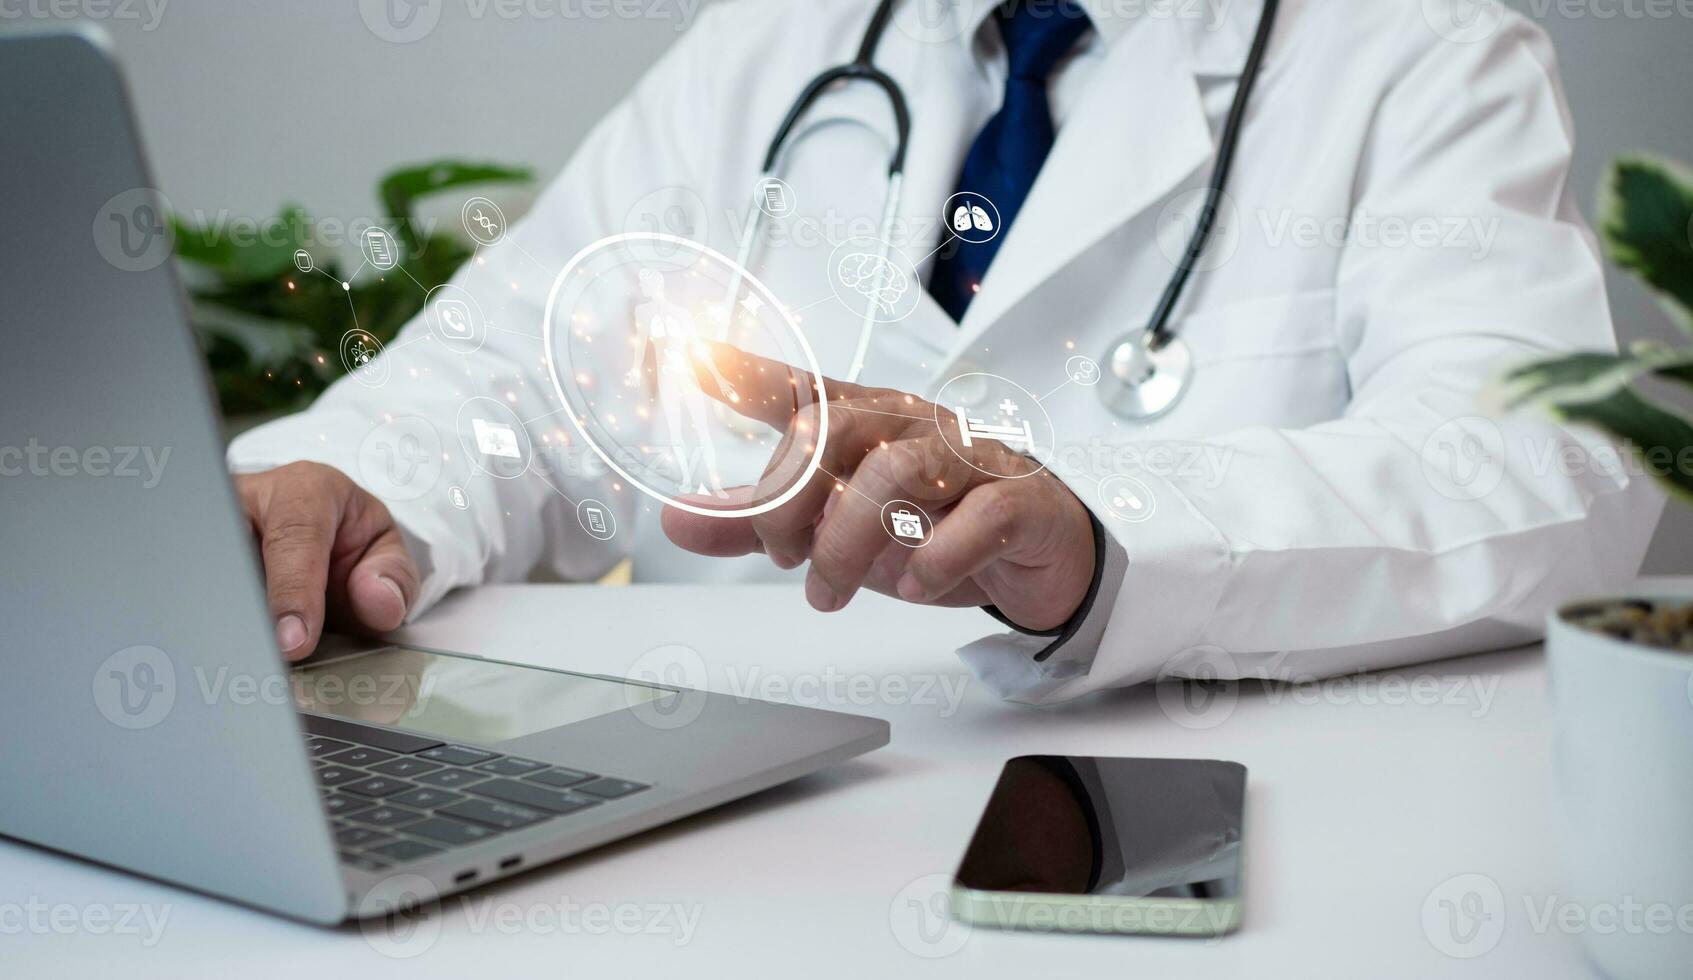 Doctors use smartphones and computers to research medical information. medical concept photo